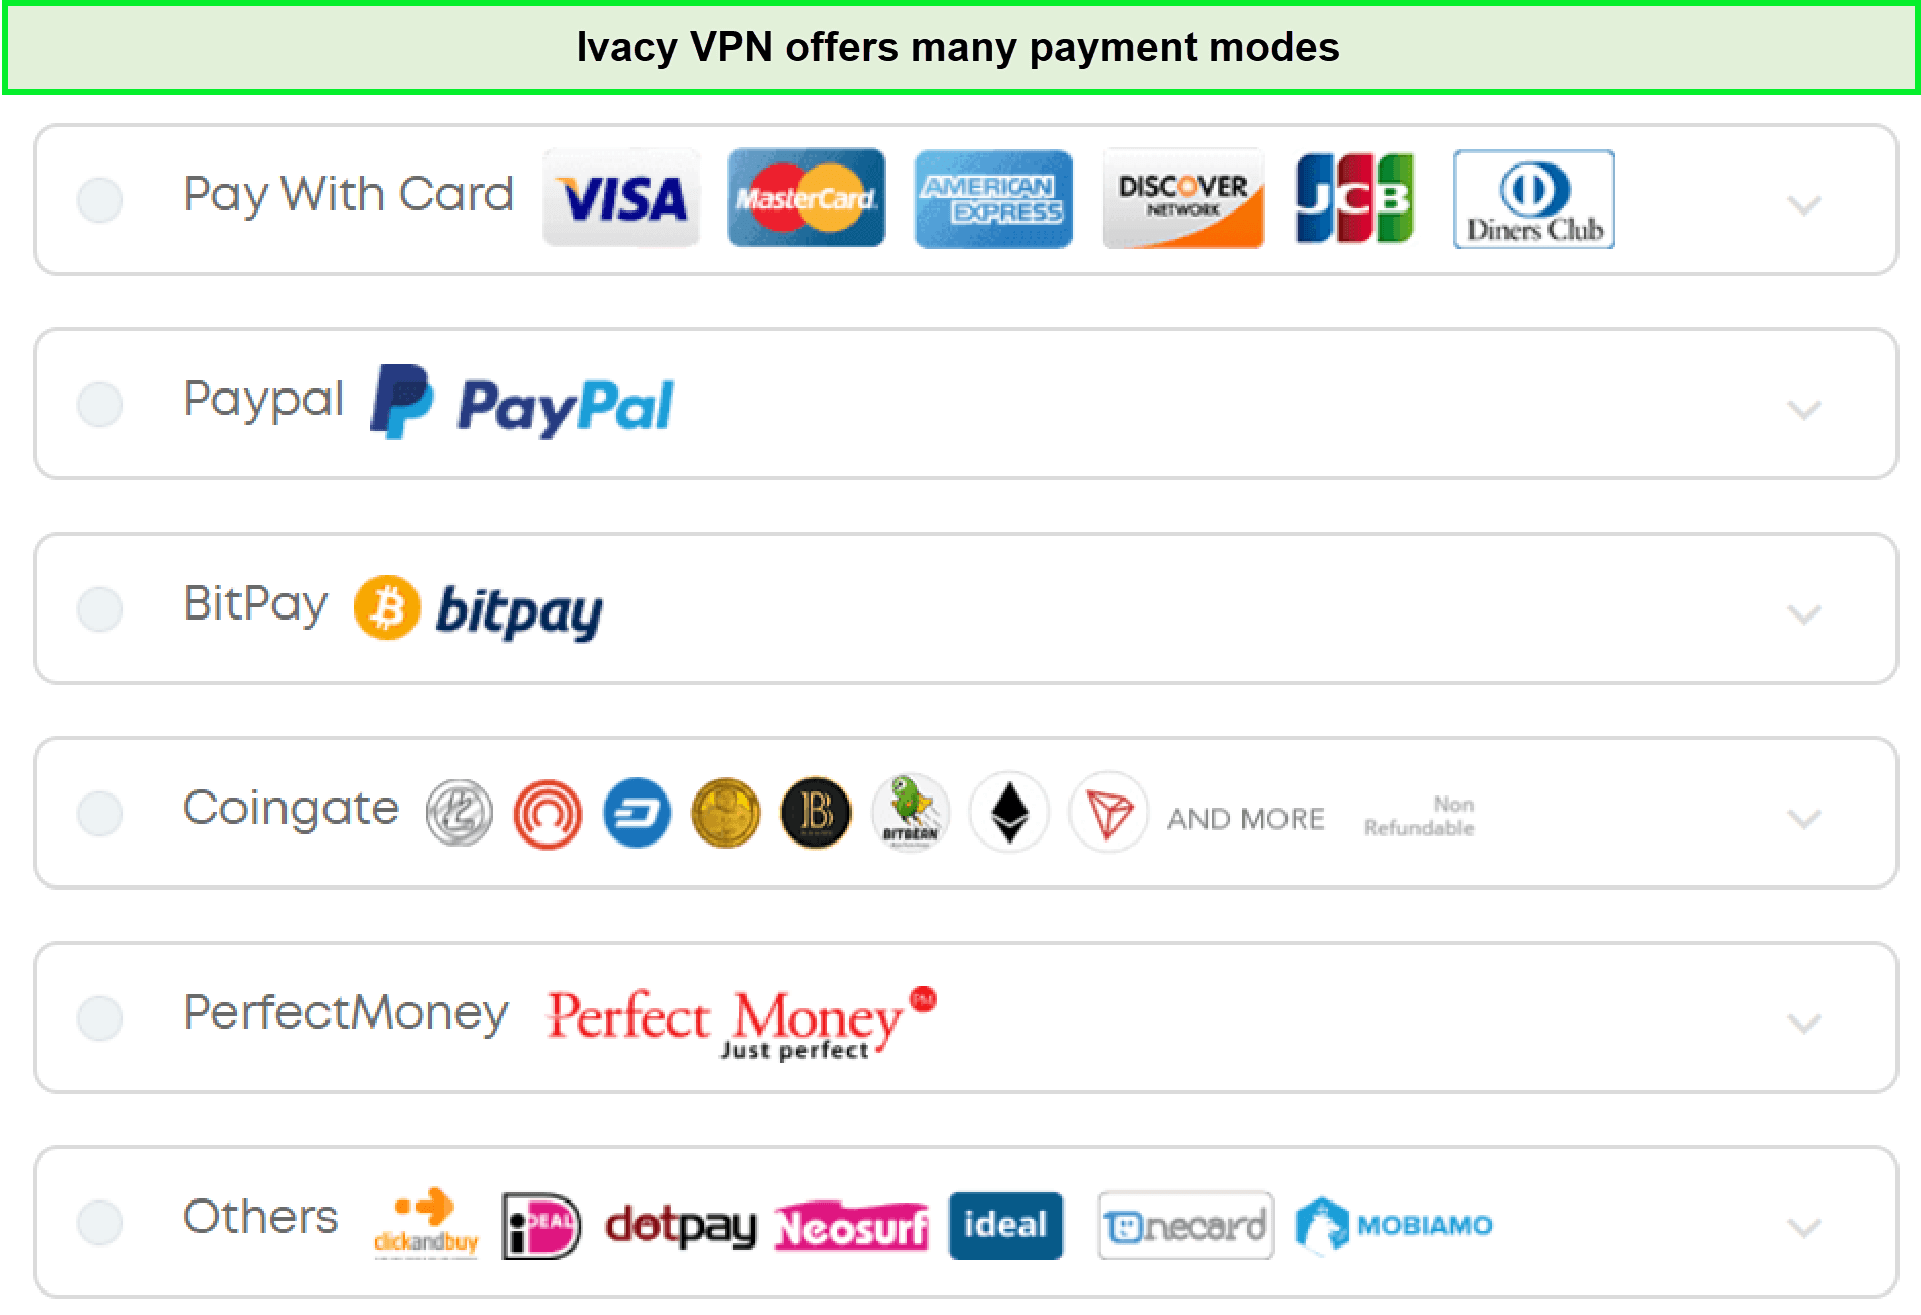 ivacy-payment-modes-in-UAE